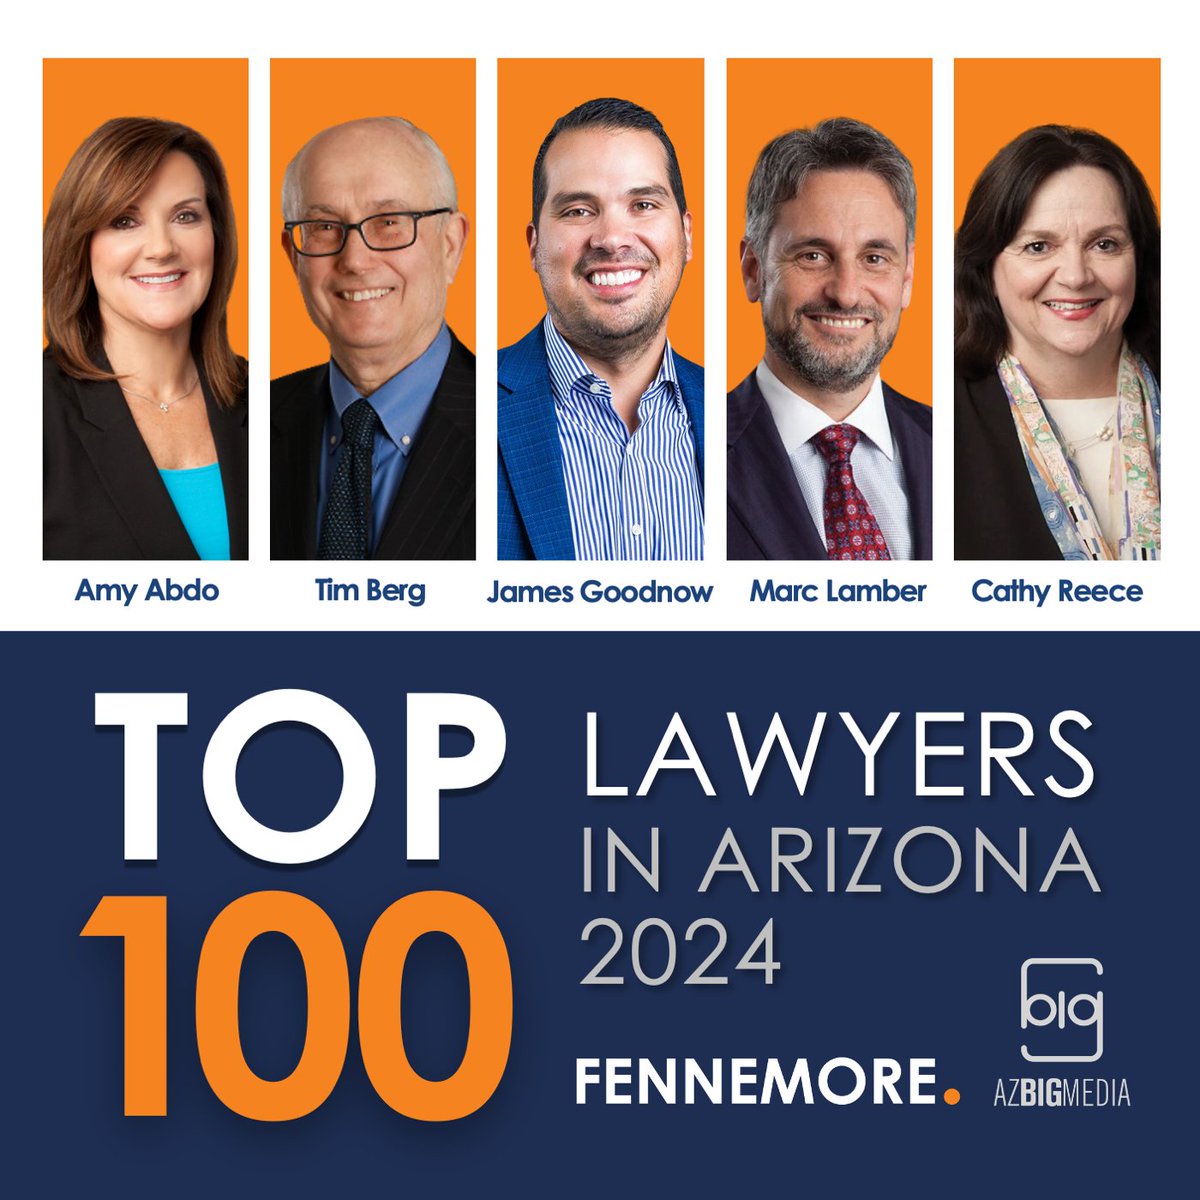 Big news! Five Fennemore attorneys were listed on AZ Big Media's 2024 Top 100 Lawyers in Arizona!
Click here to read more about their skills: ow.ly/5By150Qv1hz

#TopLawyers #AZBigMedia #Arizona #Fennemore #LegalProfessionals